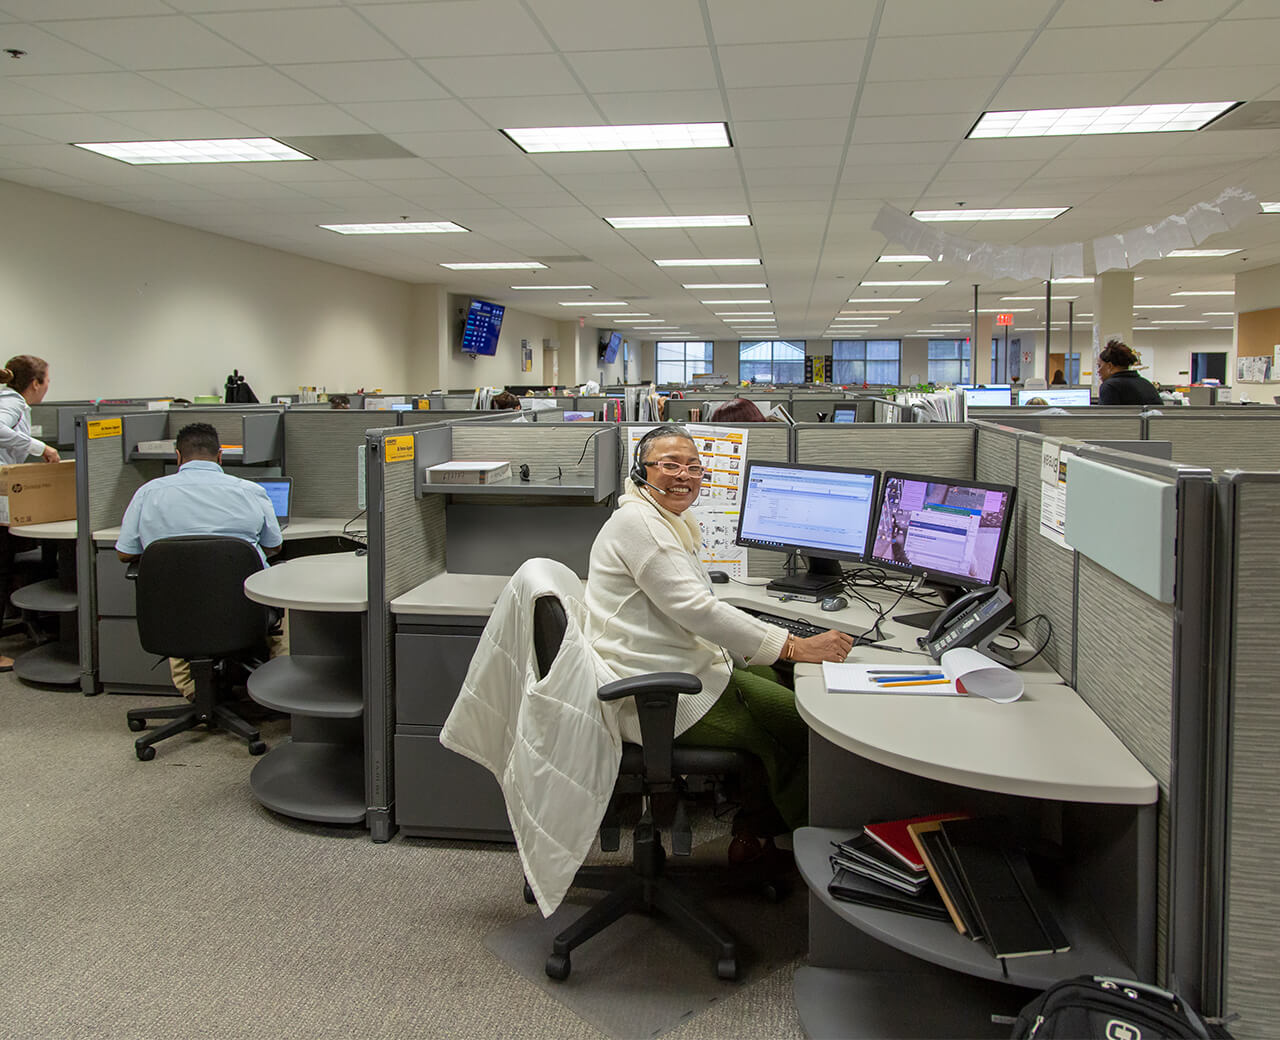 HD Supply personnel in a shared office environment